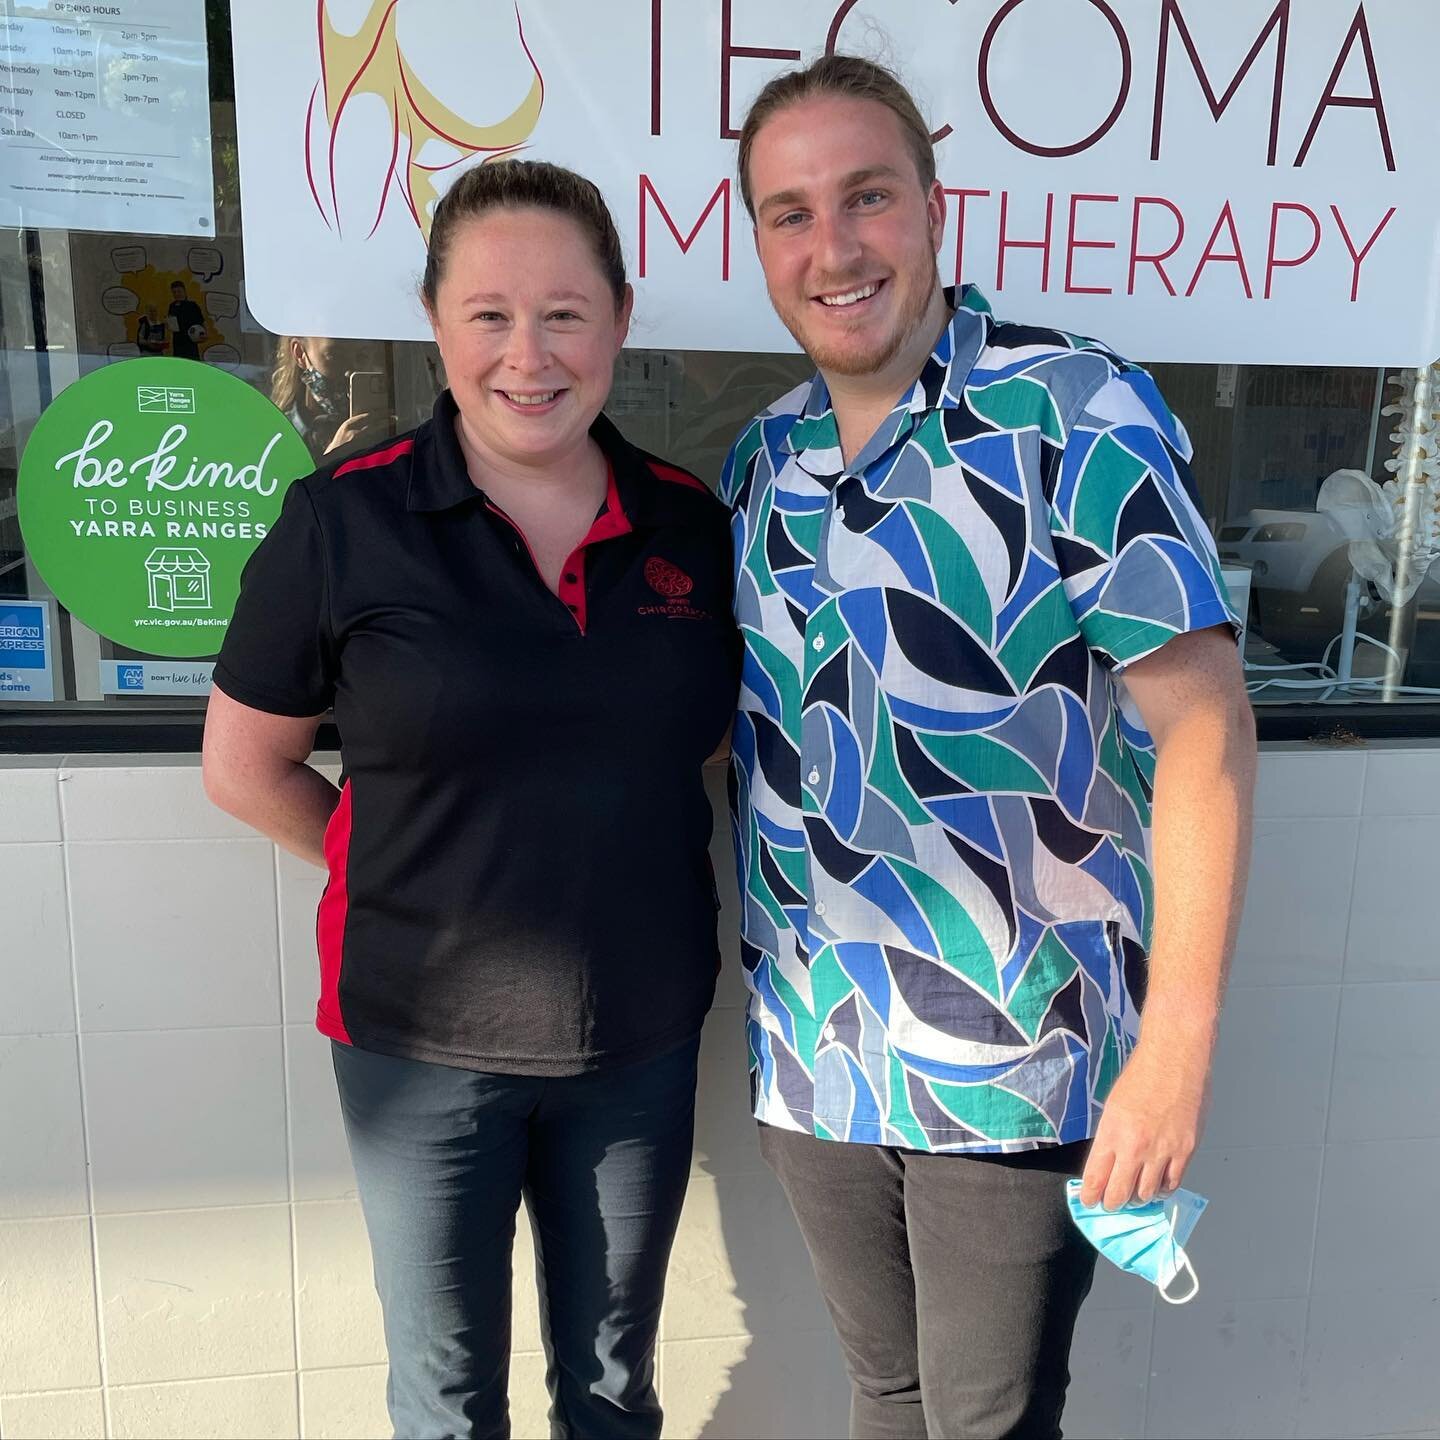 Yesterday, we sadly said goodbye to Clare, one of our amazing chiropractors here at Upwey. Clare has entrusted Lachie to continue the amazing care that Clare has provided to all her patients and the support she has shown the community. We will miss C